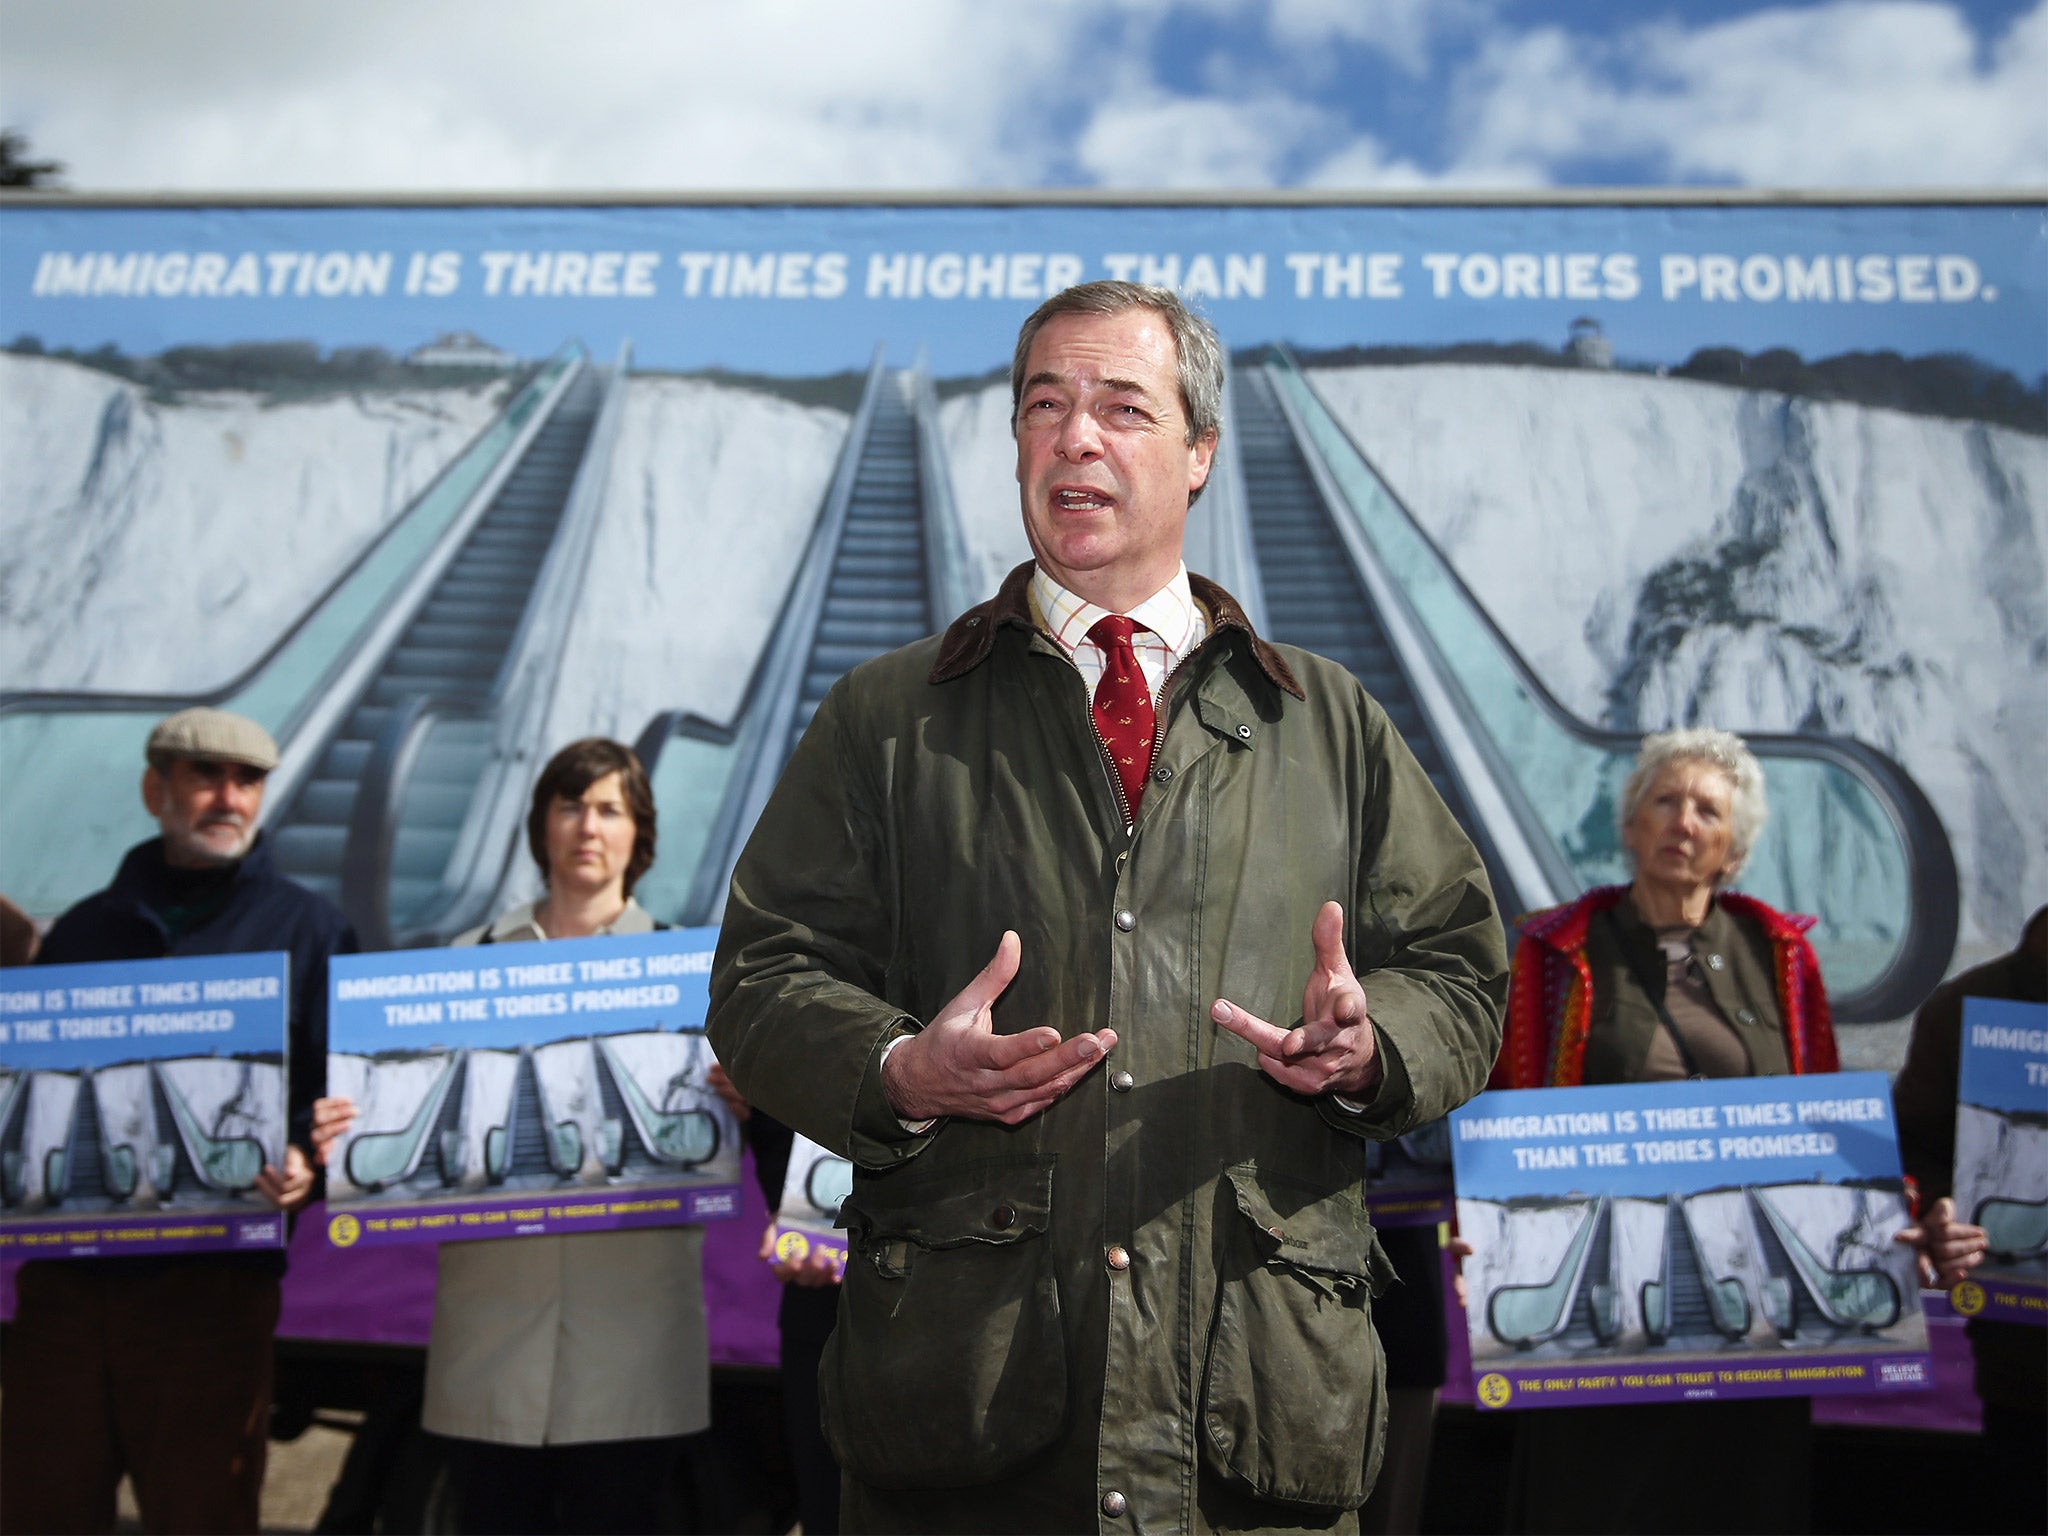 Nigel Farage unveiled Ukip’s latest campaign poster in Dover on Tuesday, saying David Cameron was ‘wilfully dishonest’ on immigration